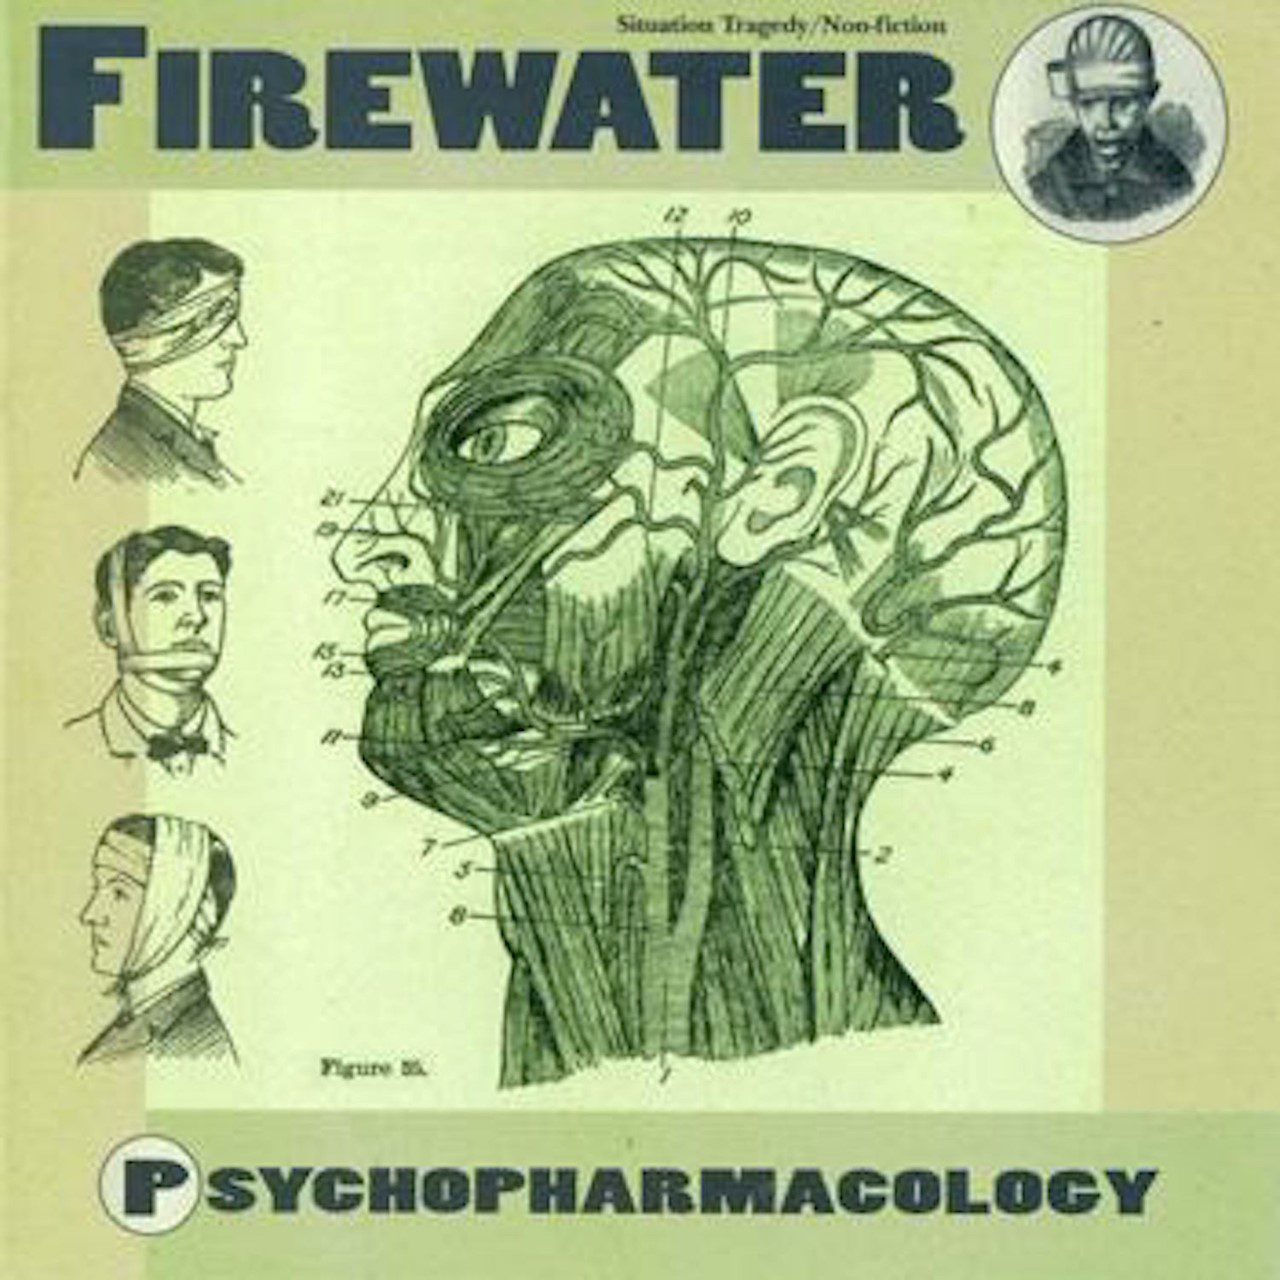 Firewater – Psychopharmacology cover album